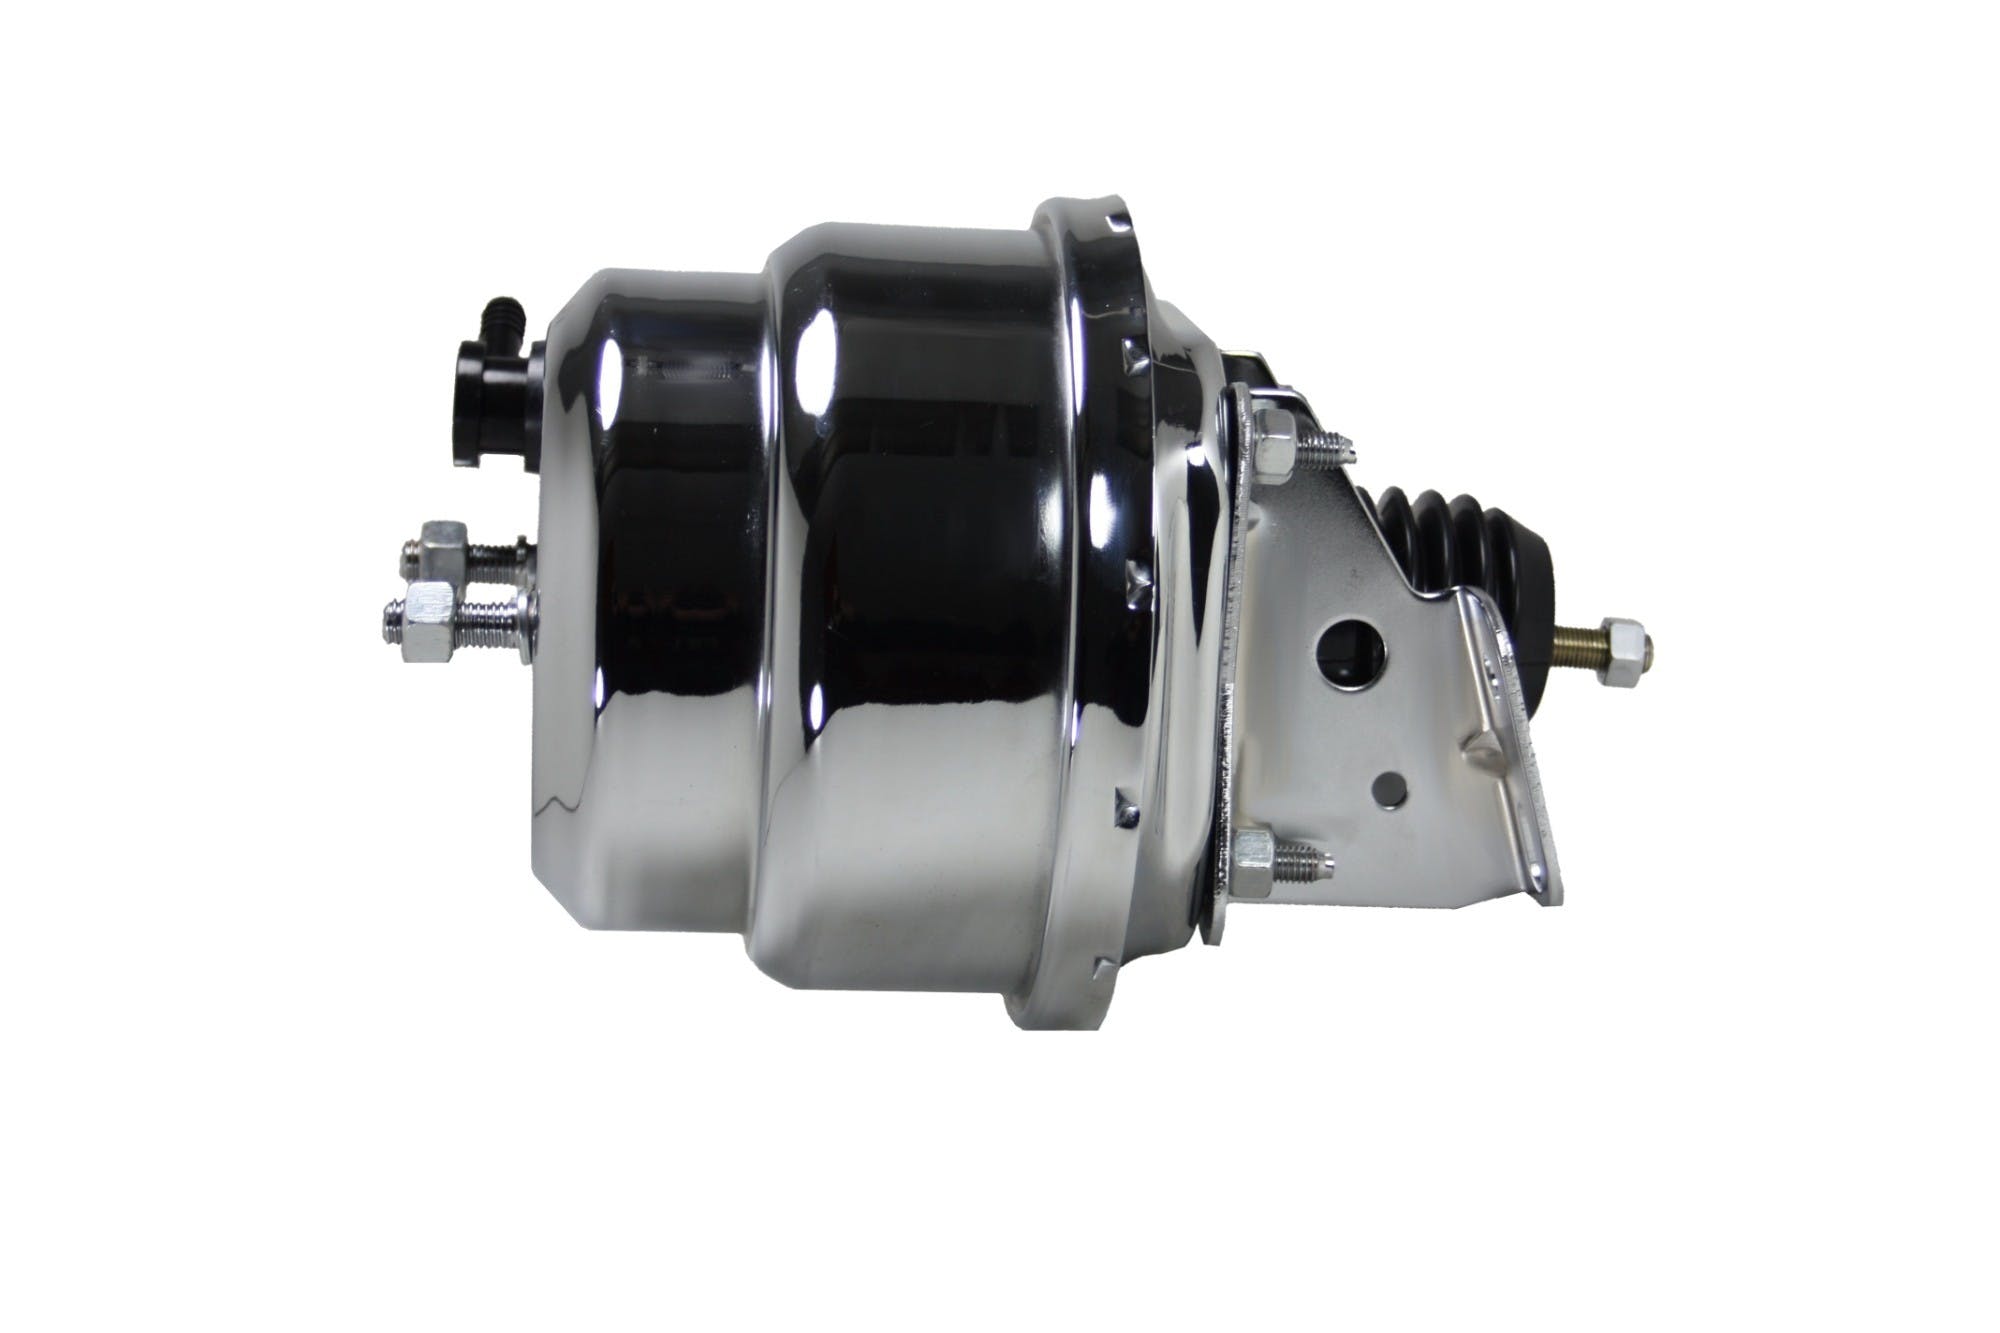 LEED Brakes PBKT1011 7 inch Dual Chrome Booster